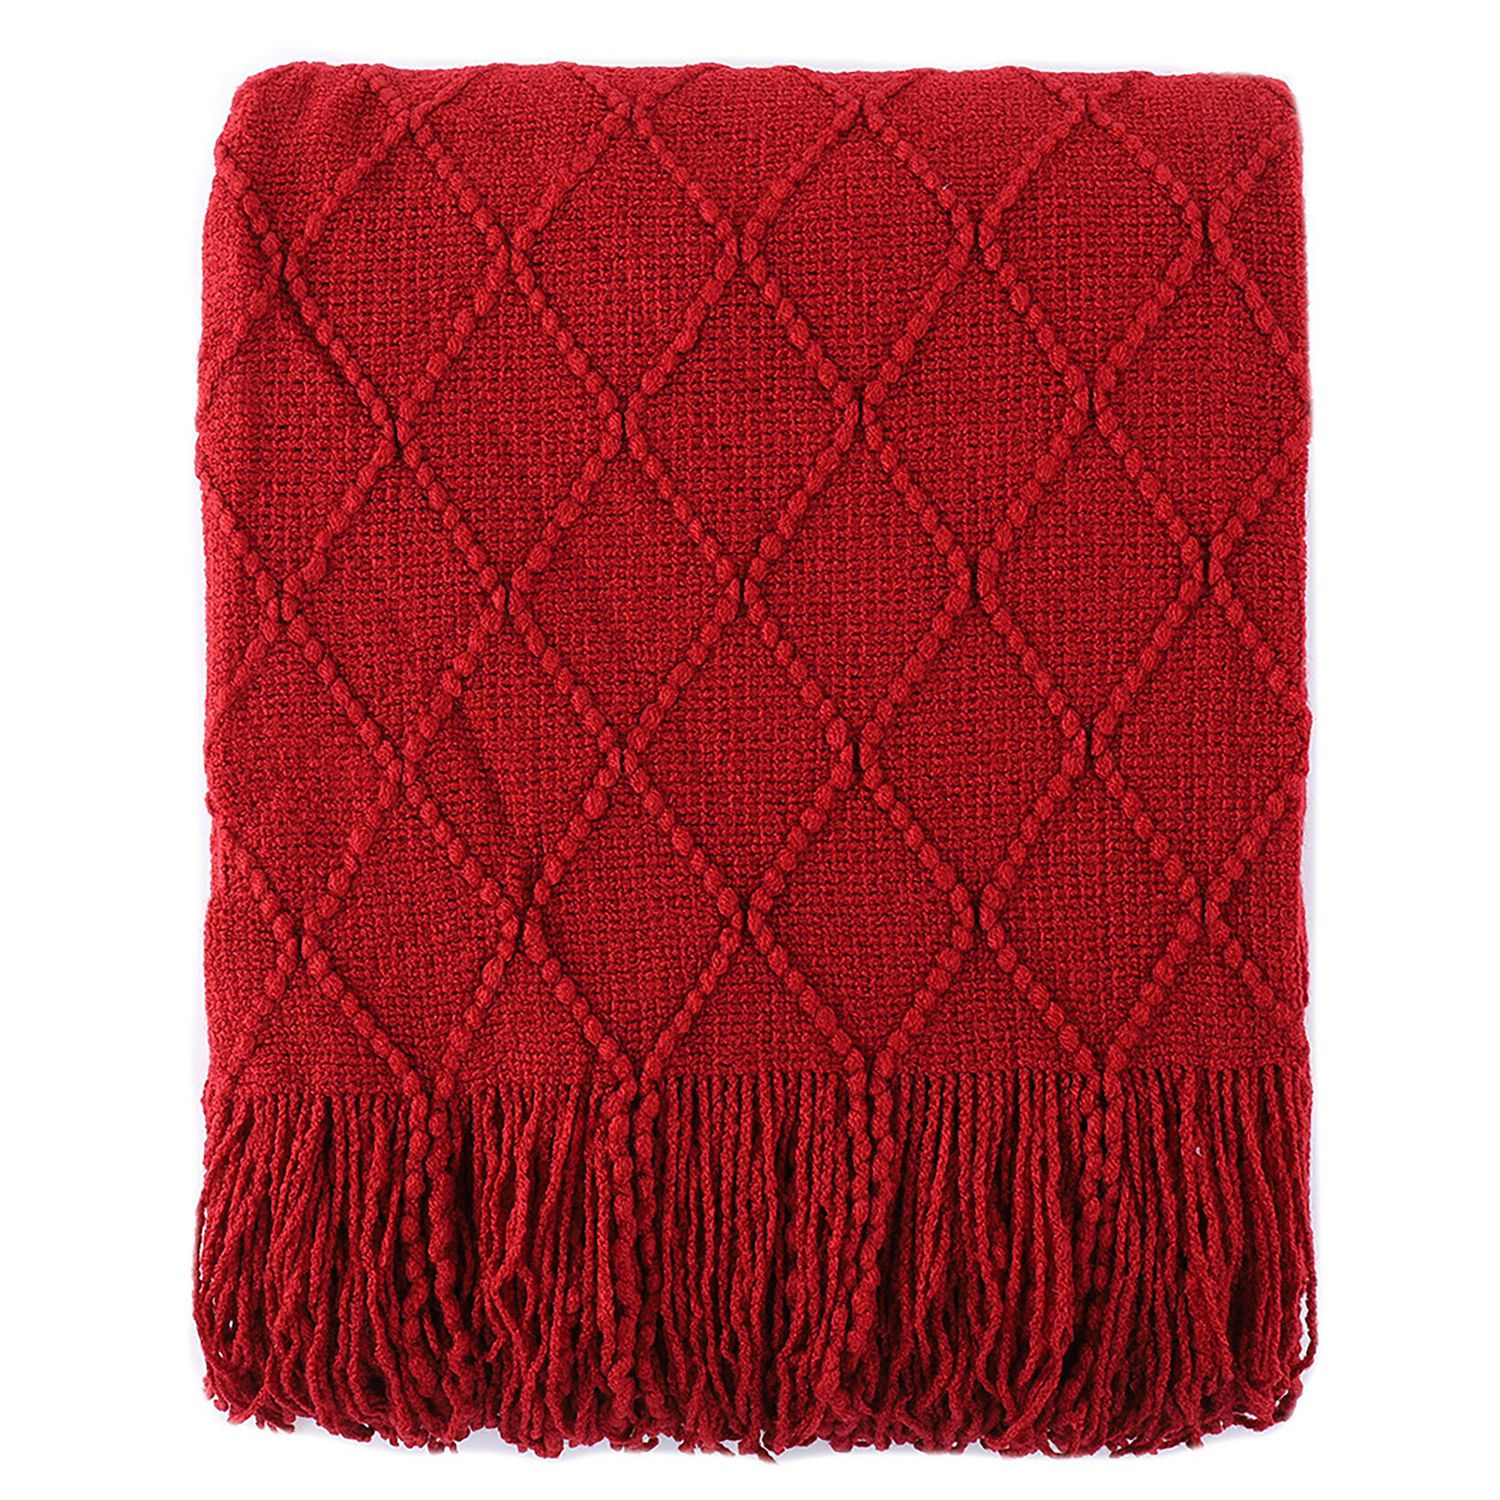 Knit Diamond Patterned Red Throw Blanket | Walmart Canada